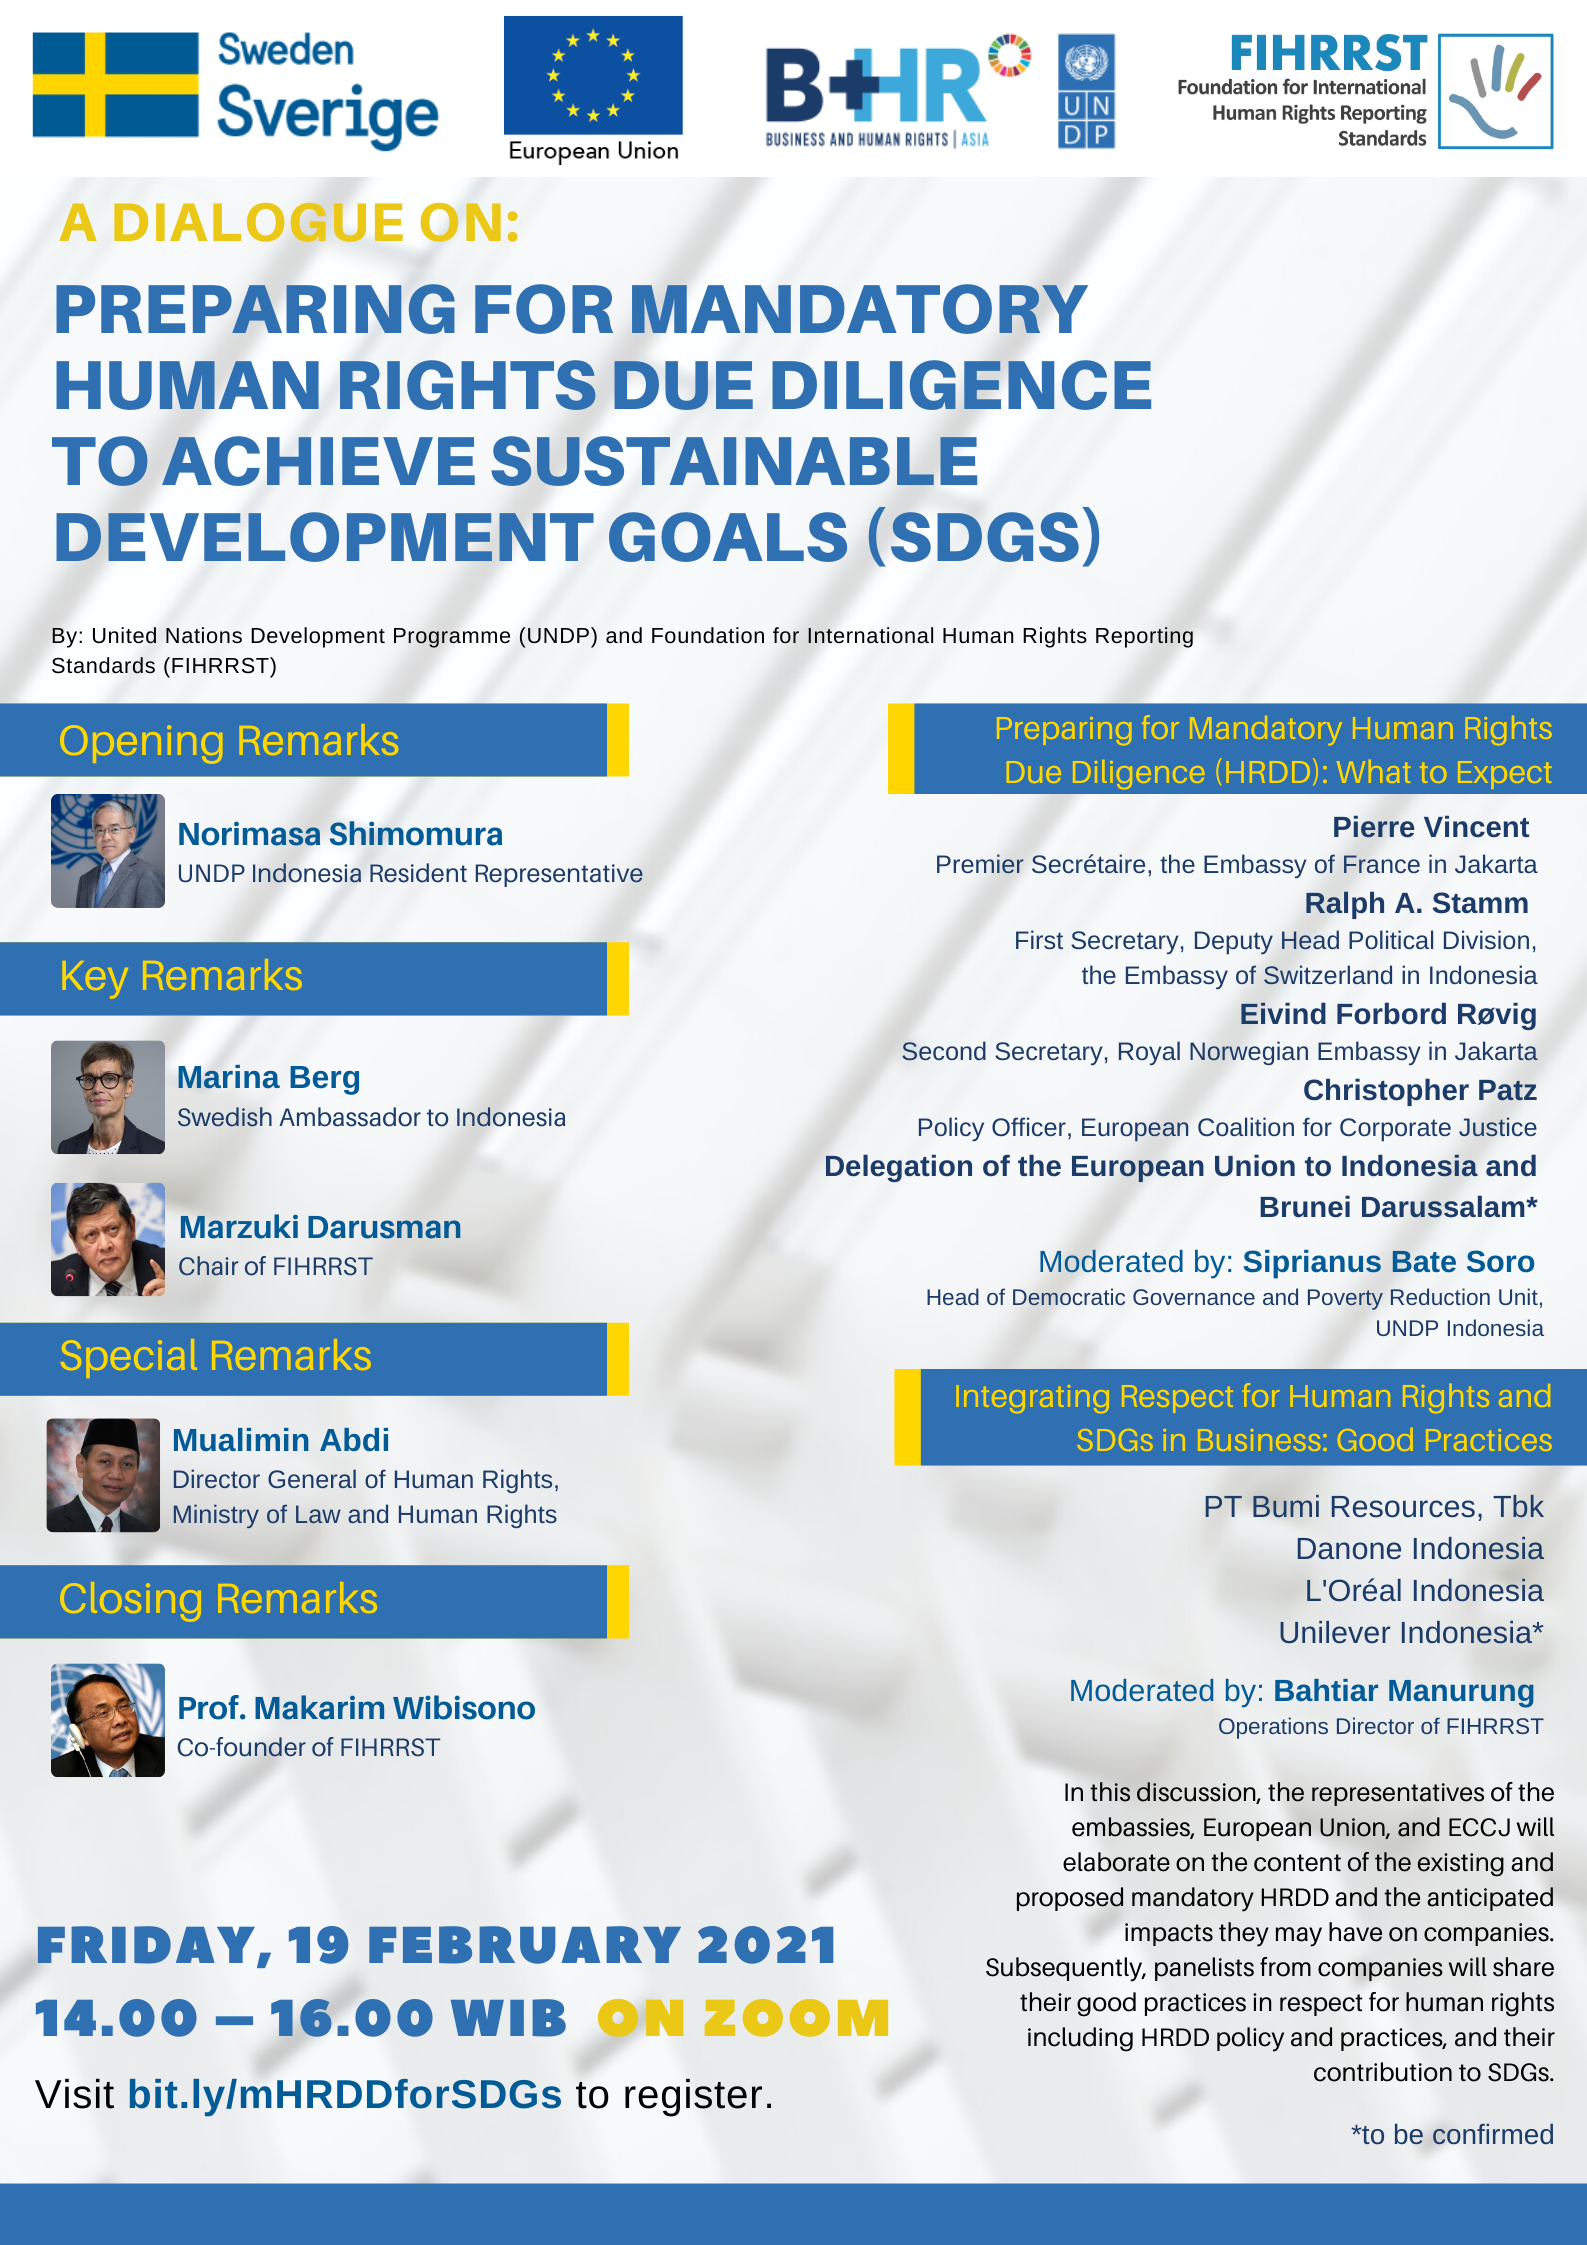 Coming Soon on 19 Feb 2021 - Discussion on Preparing for Mandatory Human Rights Due Diligence to Achieve SDGs